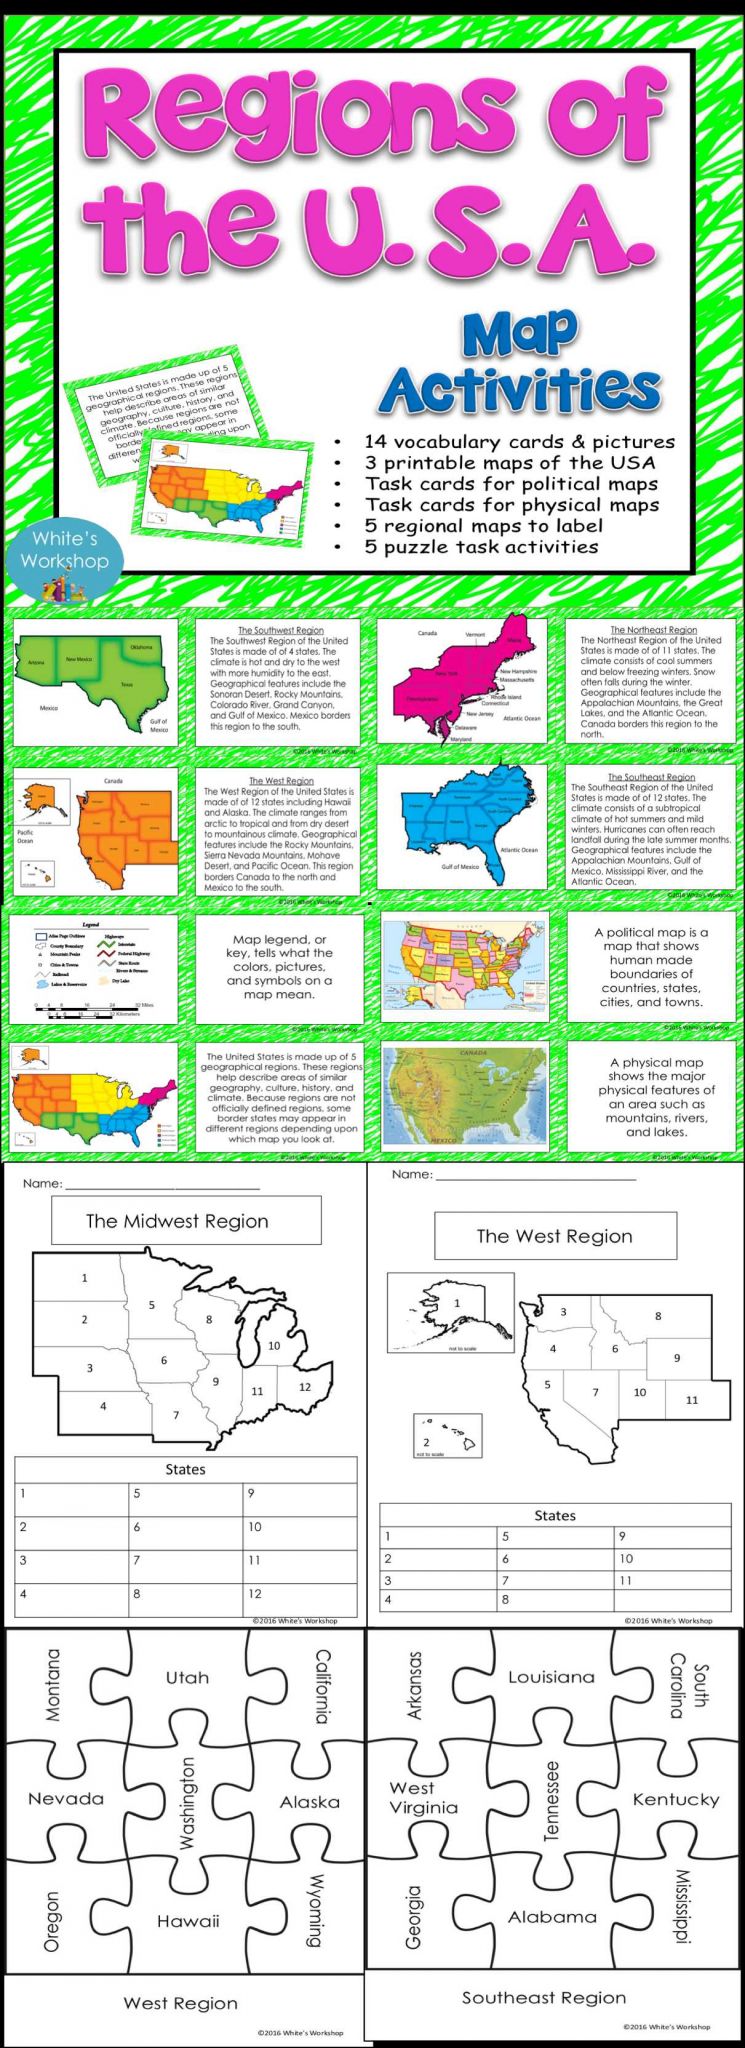 Elementary Teacher Worksheets together with Spookyhalloween Regions Of the U S Map Tasks and Activities